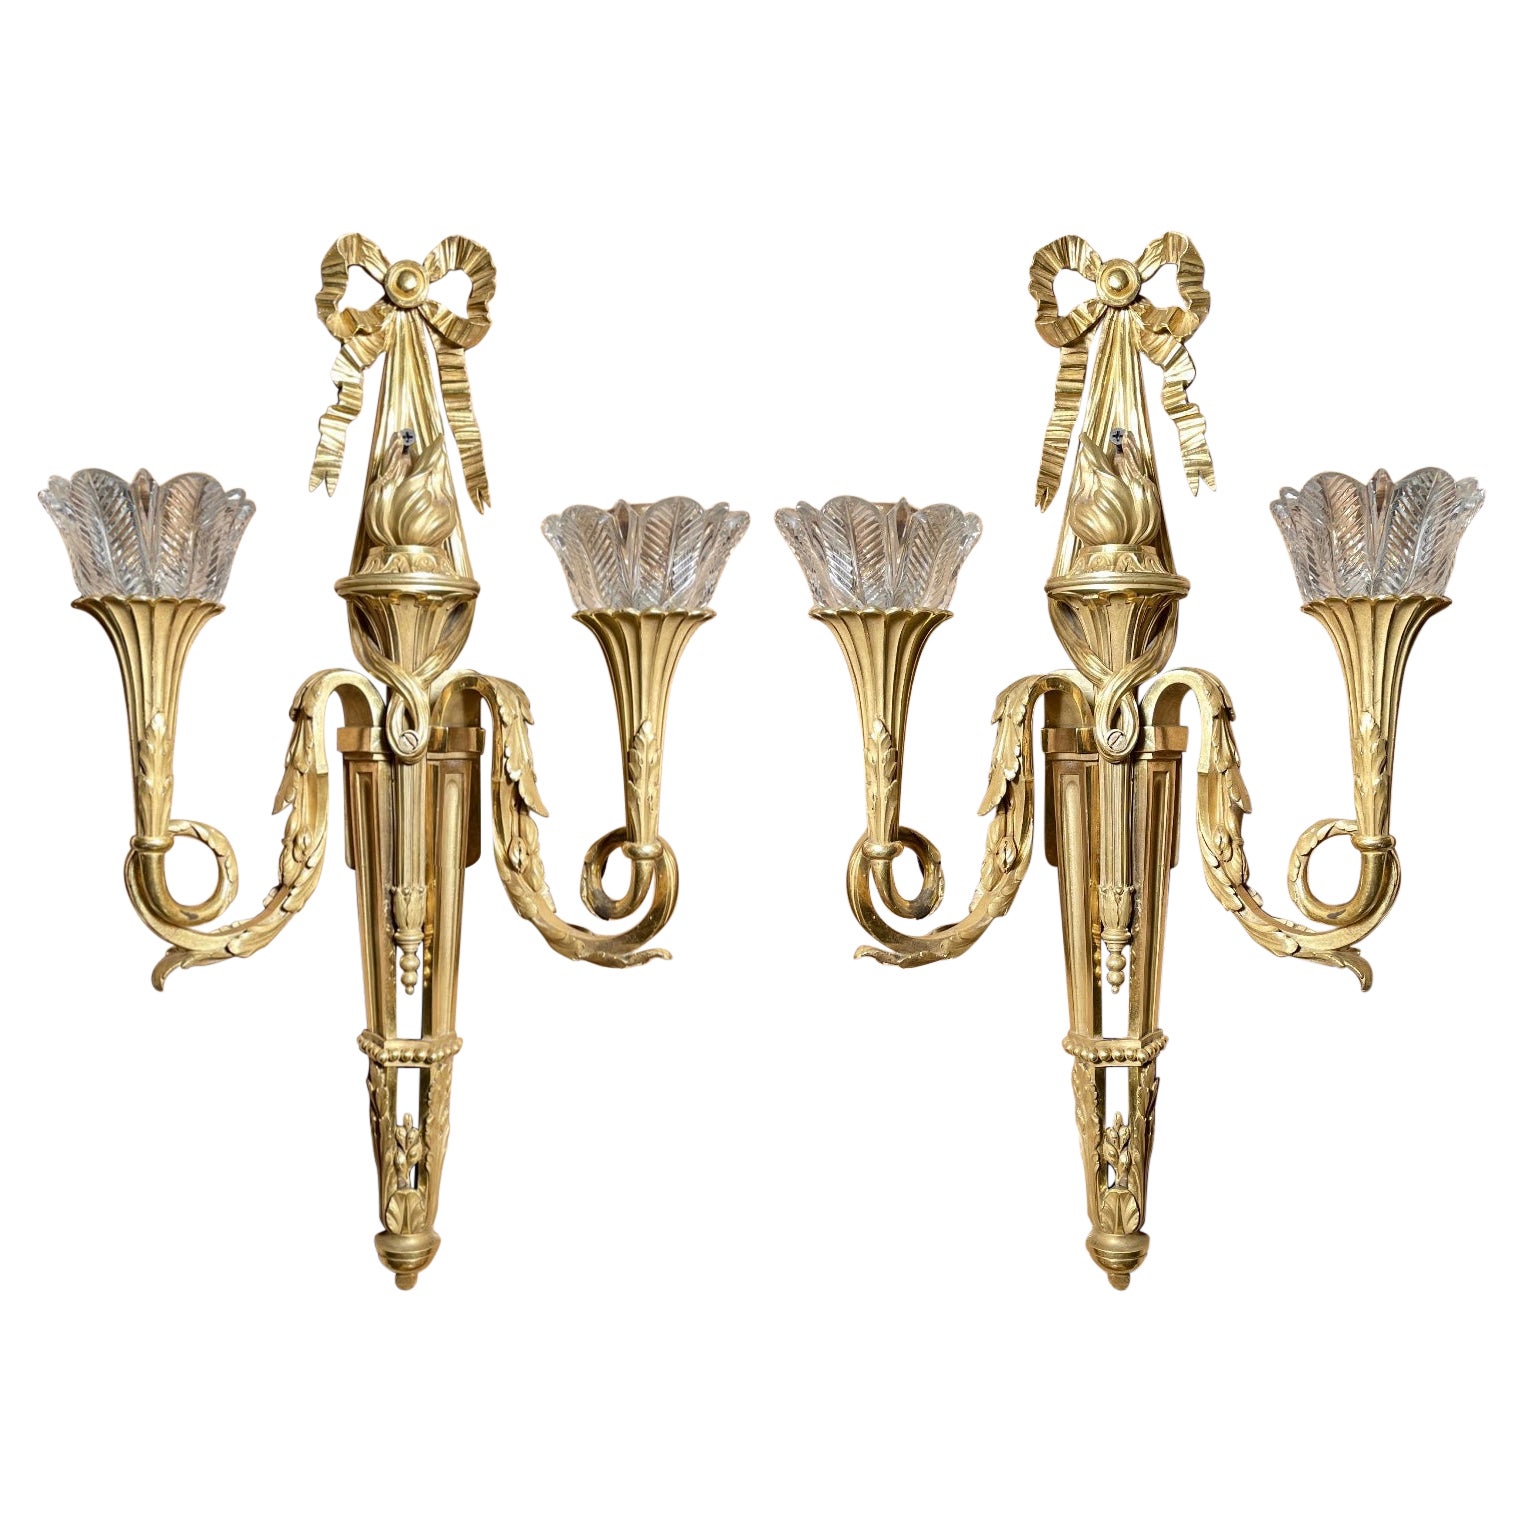 Pair Antique French Louis XVI Ormolu Sconces with Baccarat Crystal Bobeches